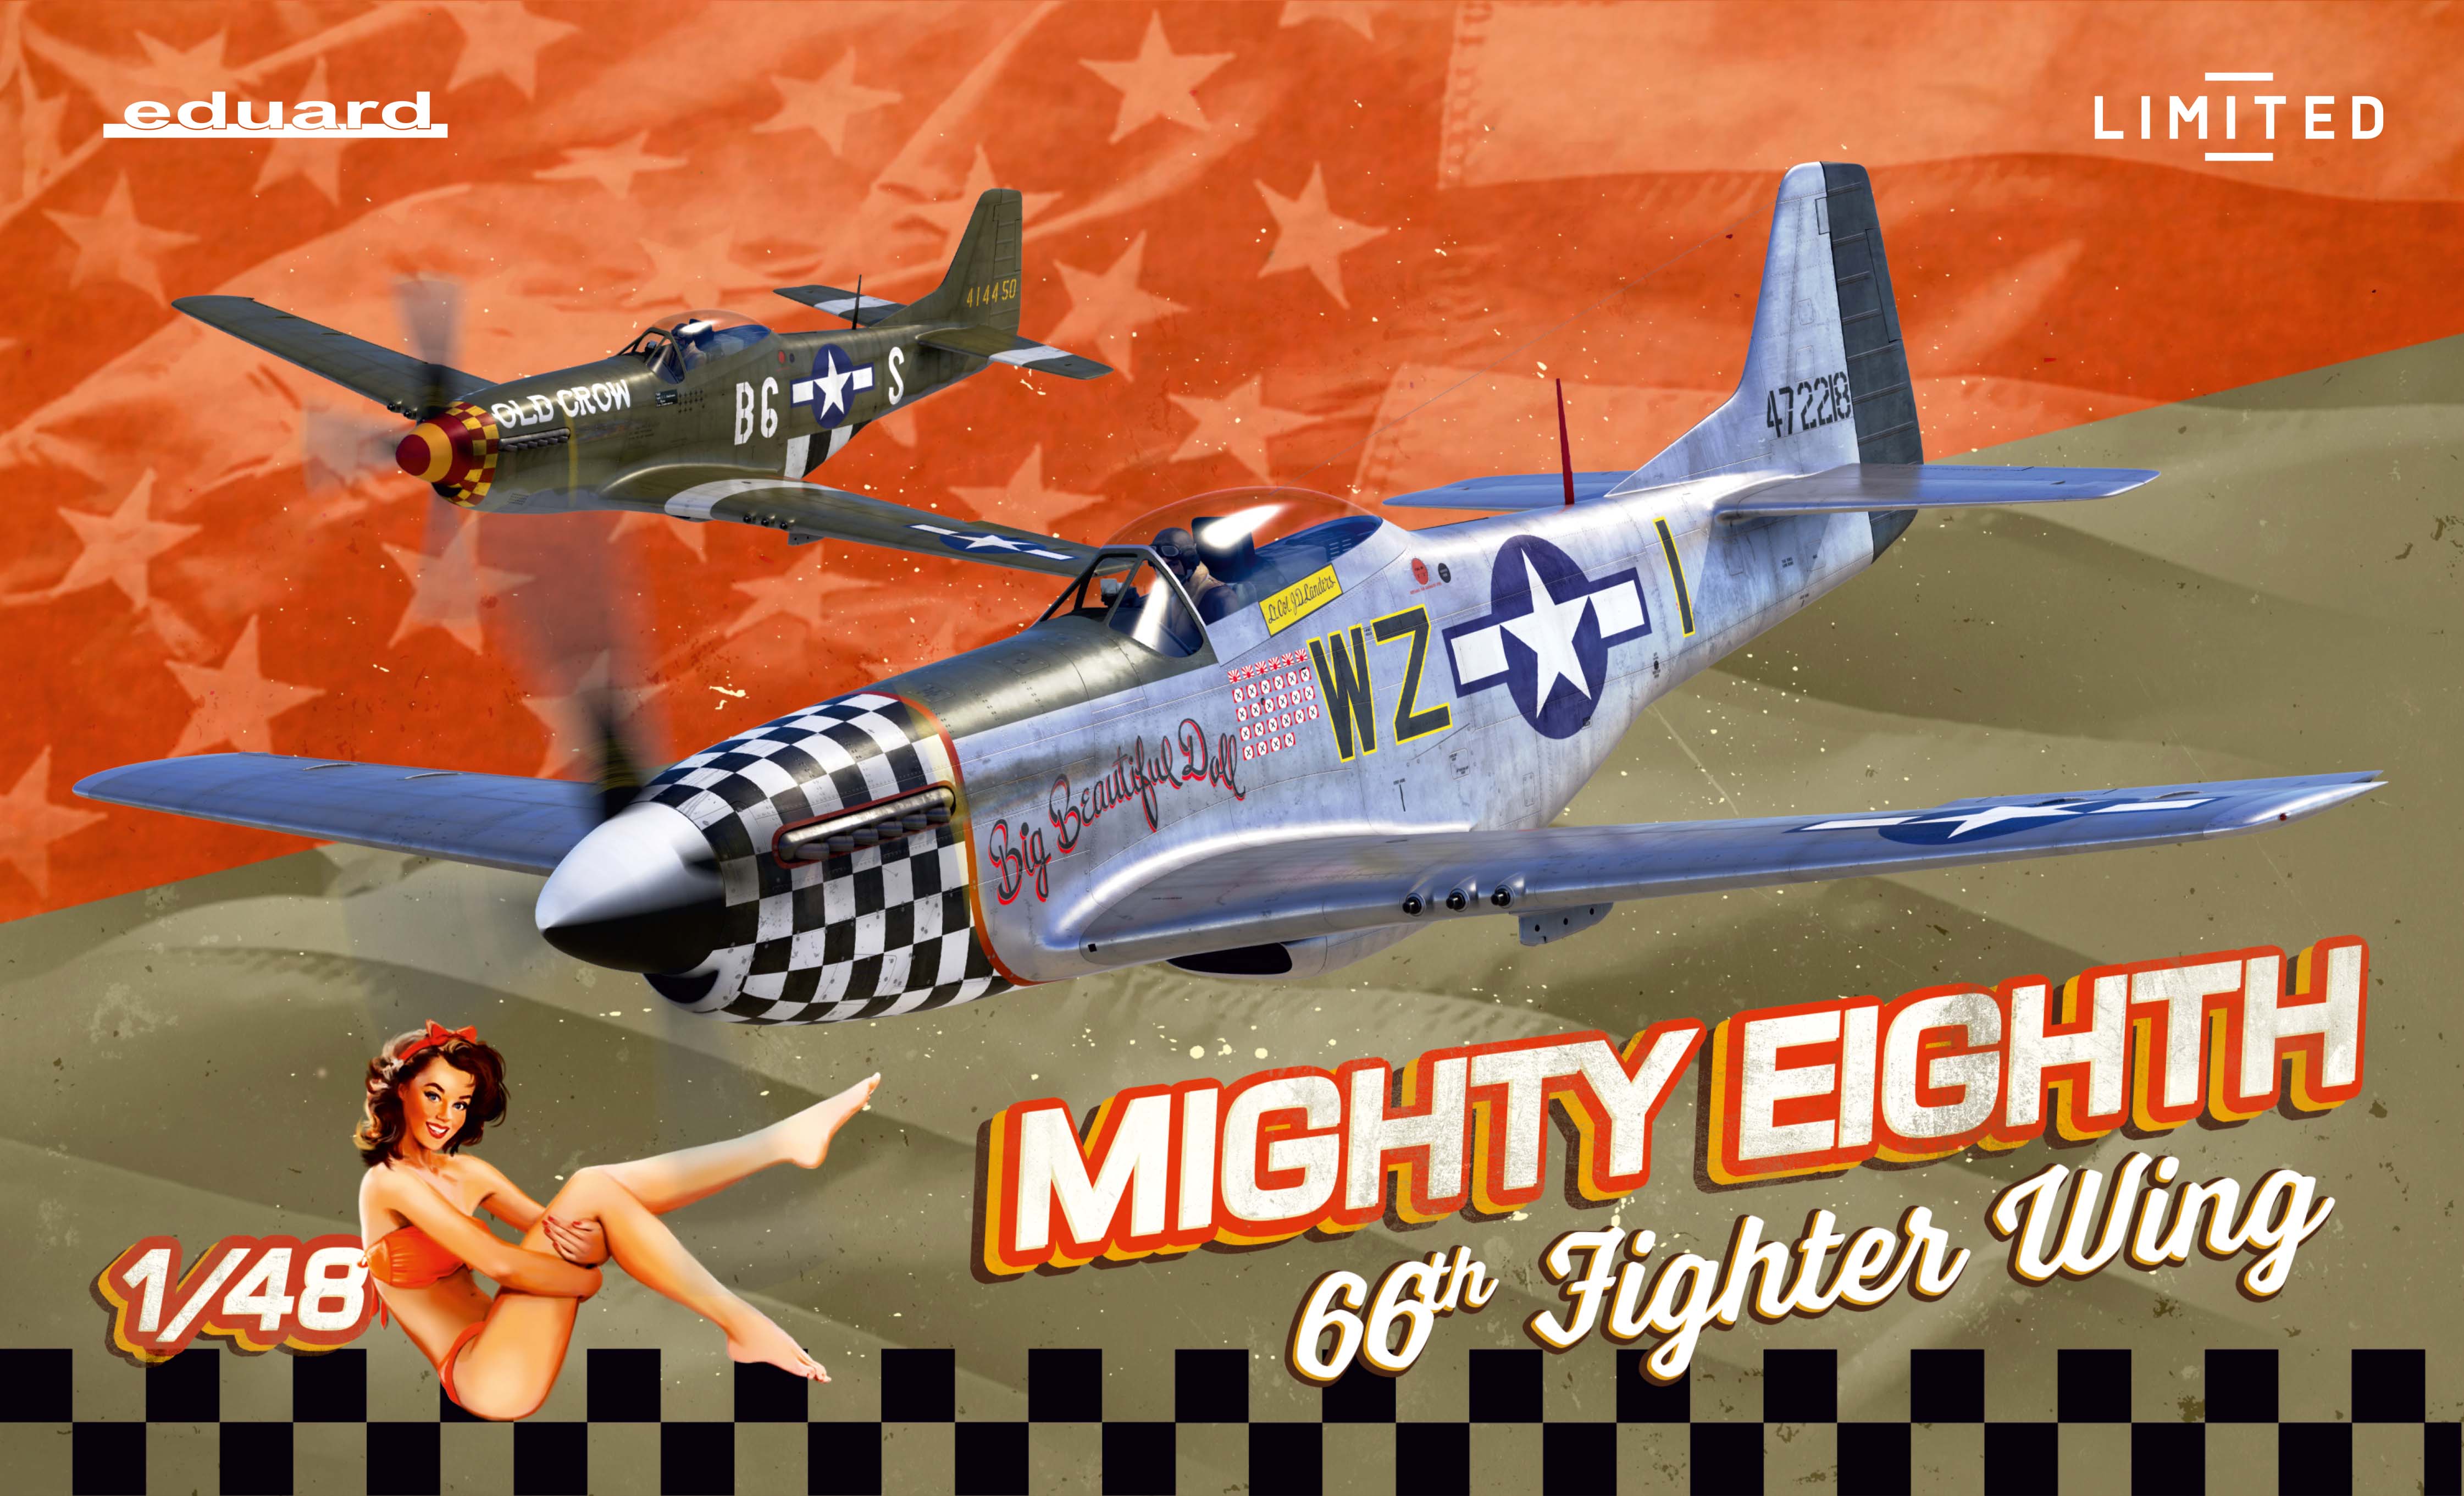 1/48 MIGHTY EIGHTH: P-51D Mustang - 66th Fighter Wing (Limited edition)